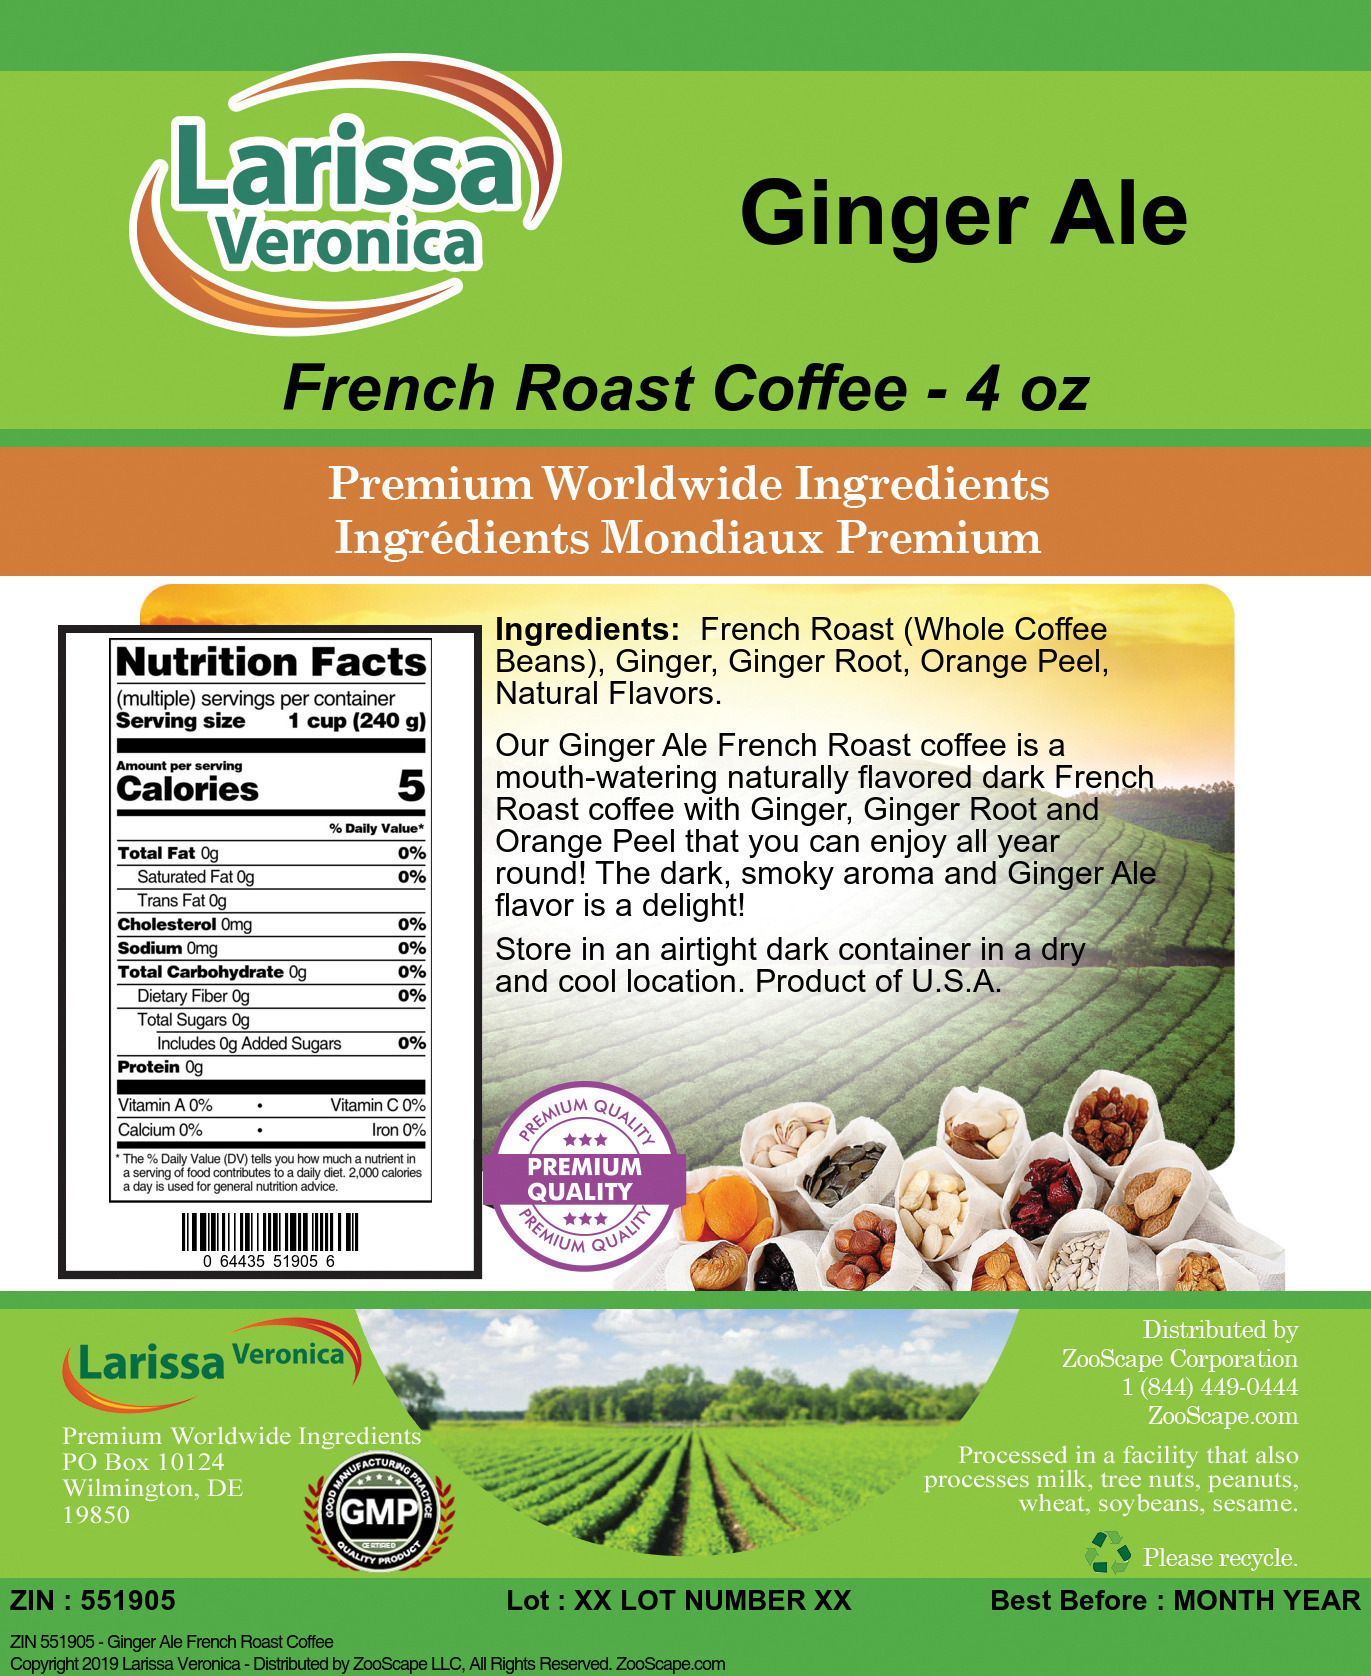 Ginger Ale French Roast Coffee - Label